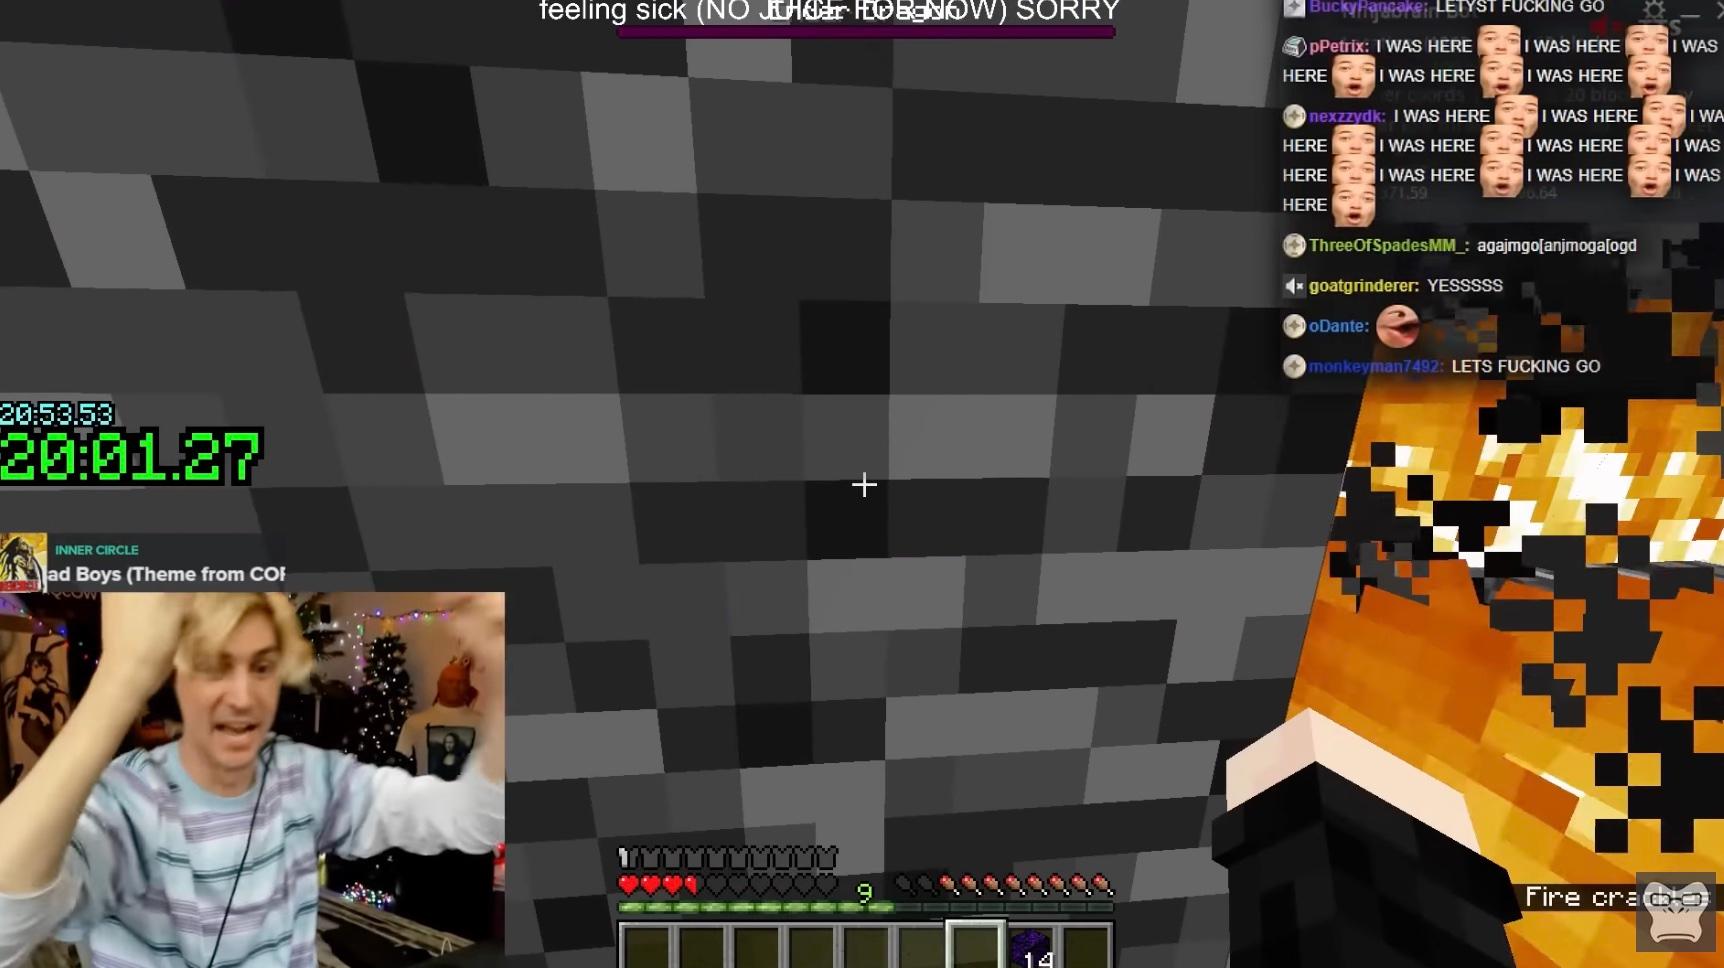 Minecraft speedrun record smashed as xQc Forsen rivalry continues